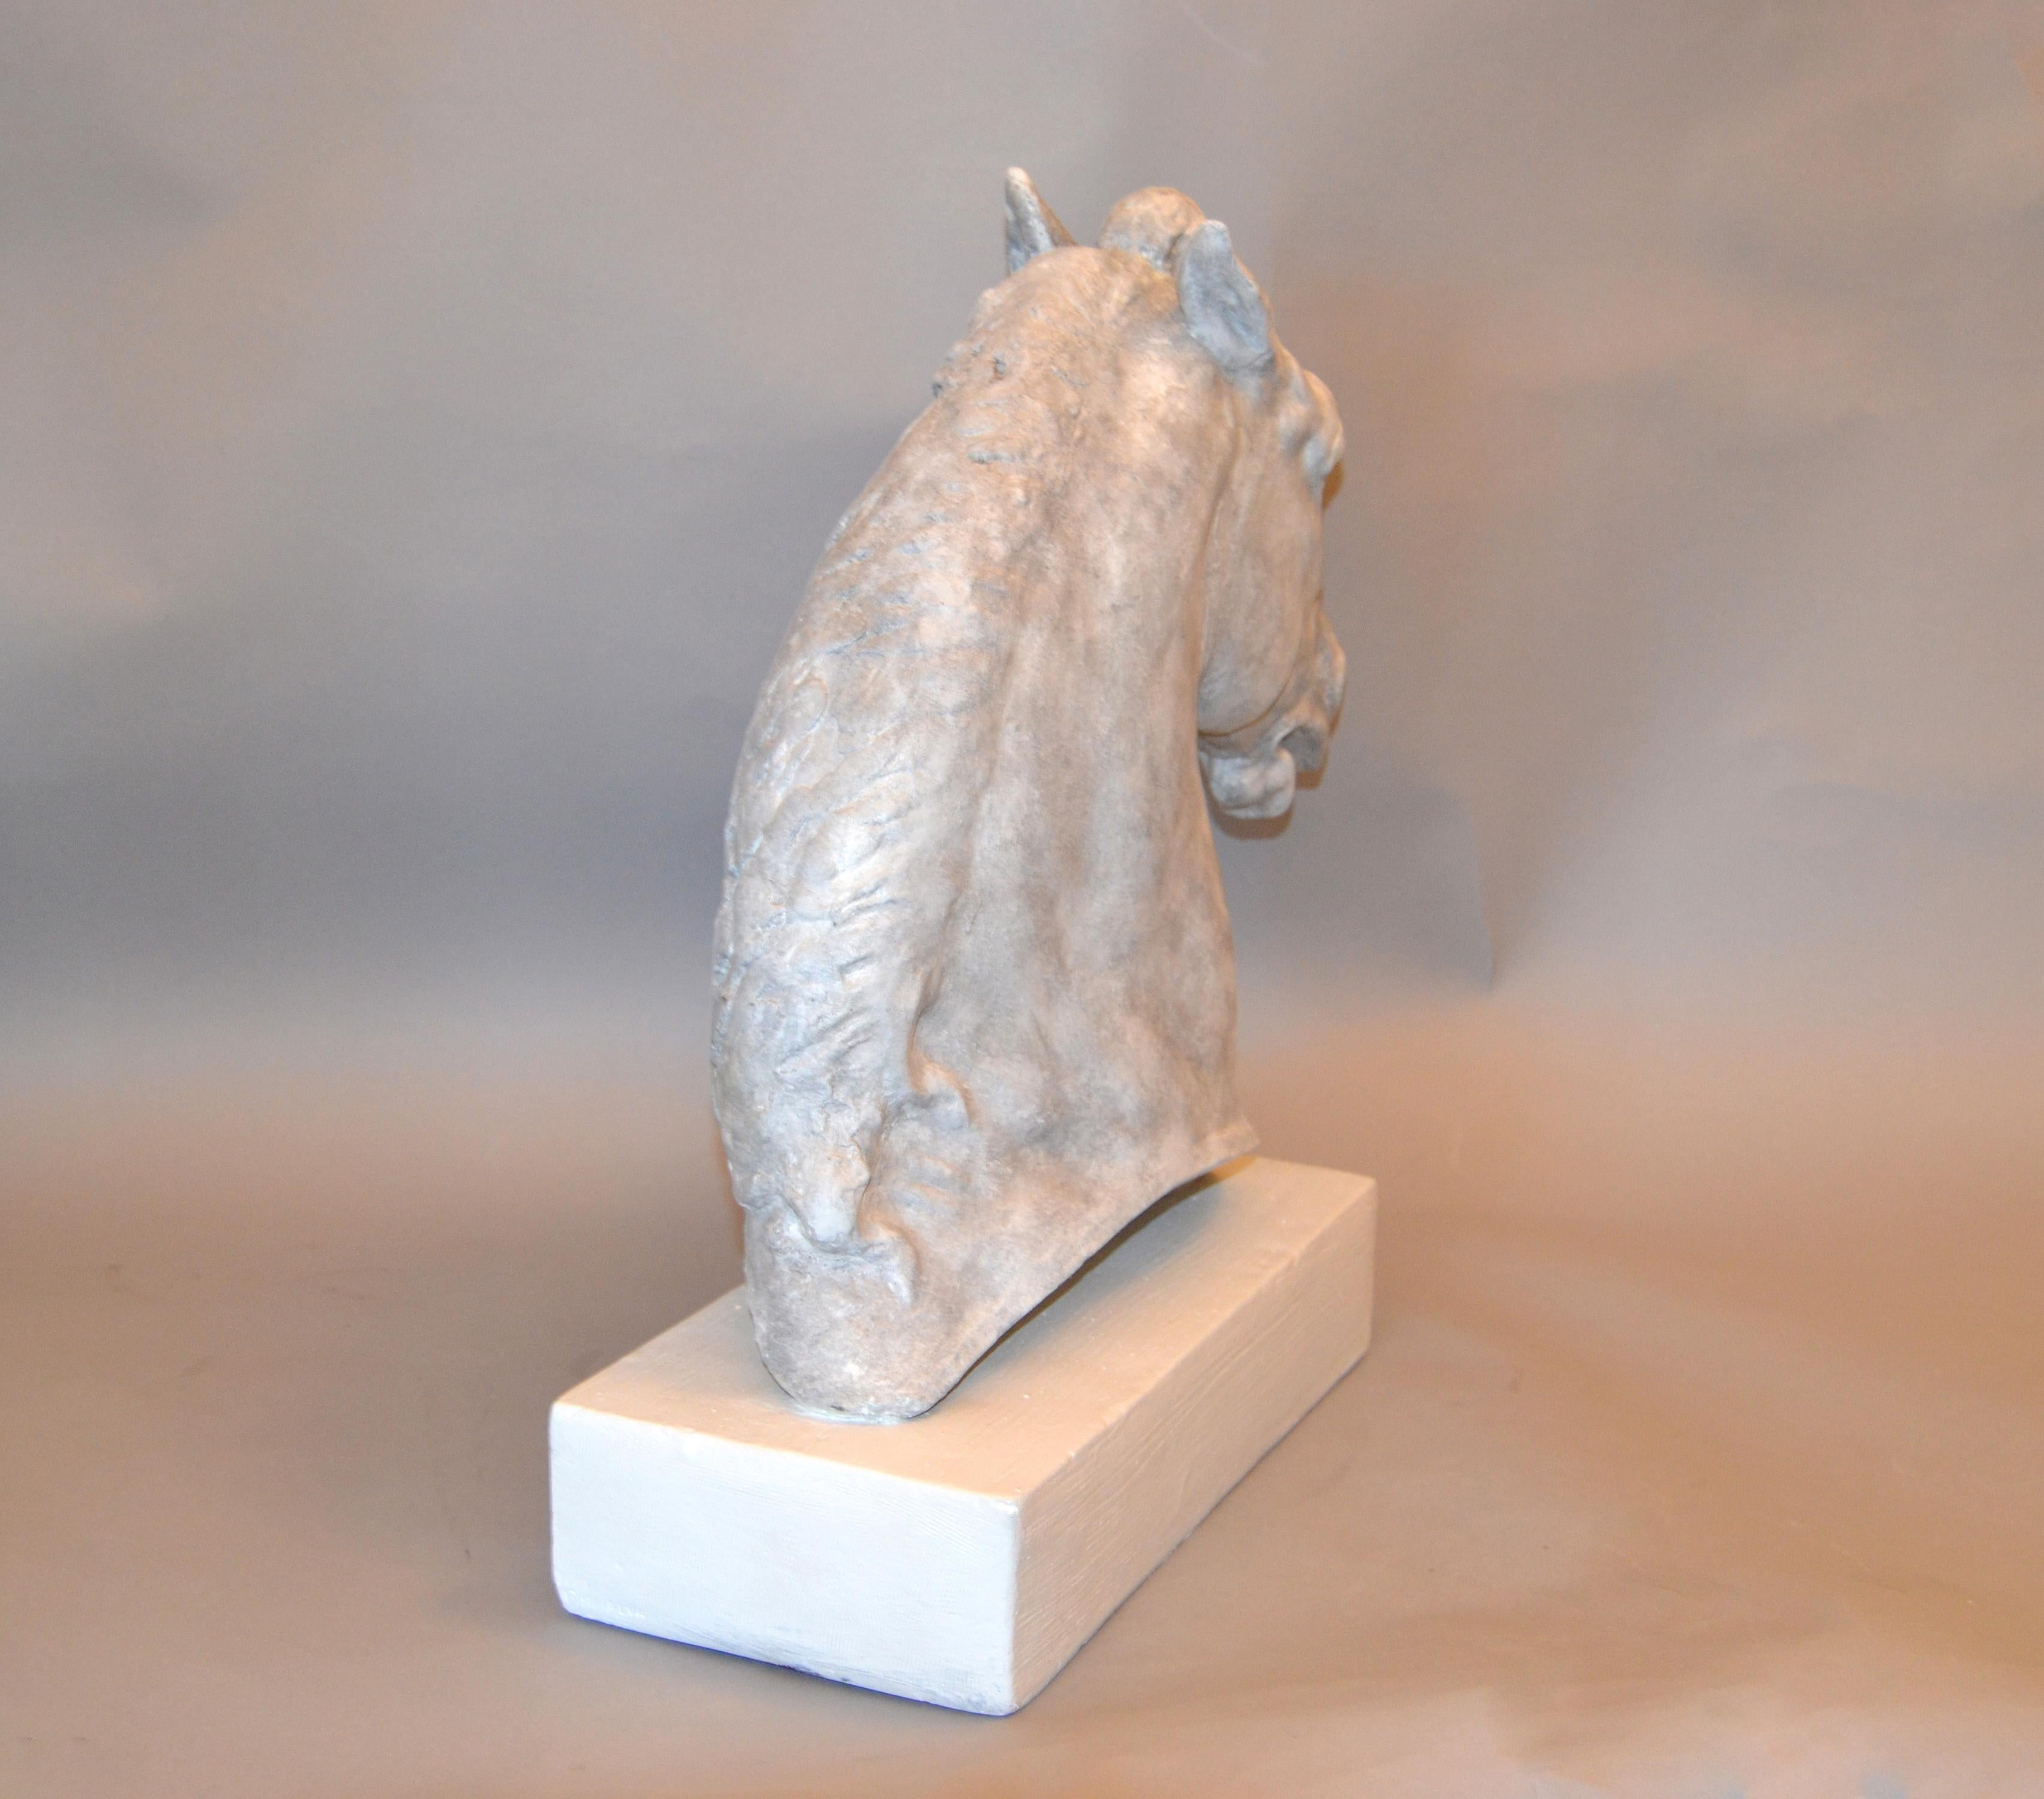 American Signed Plaster Horse Head Sculpture on Wooden Base, 1961